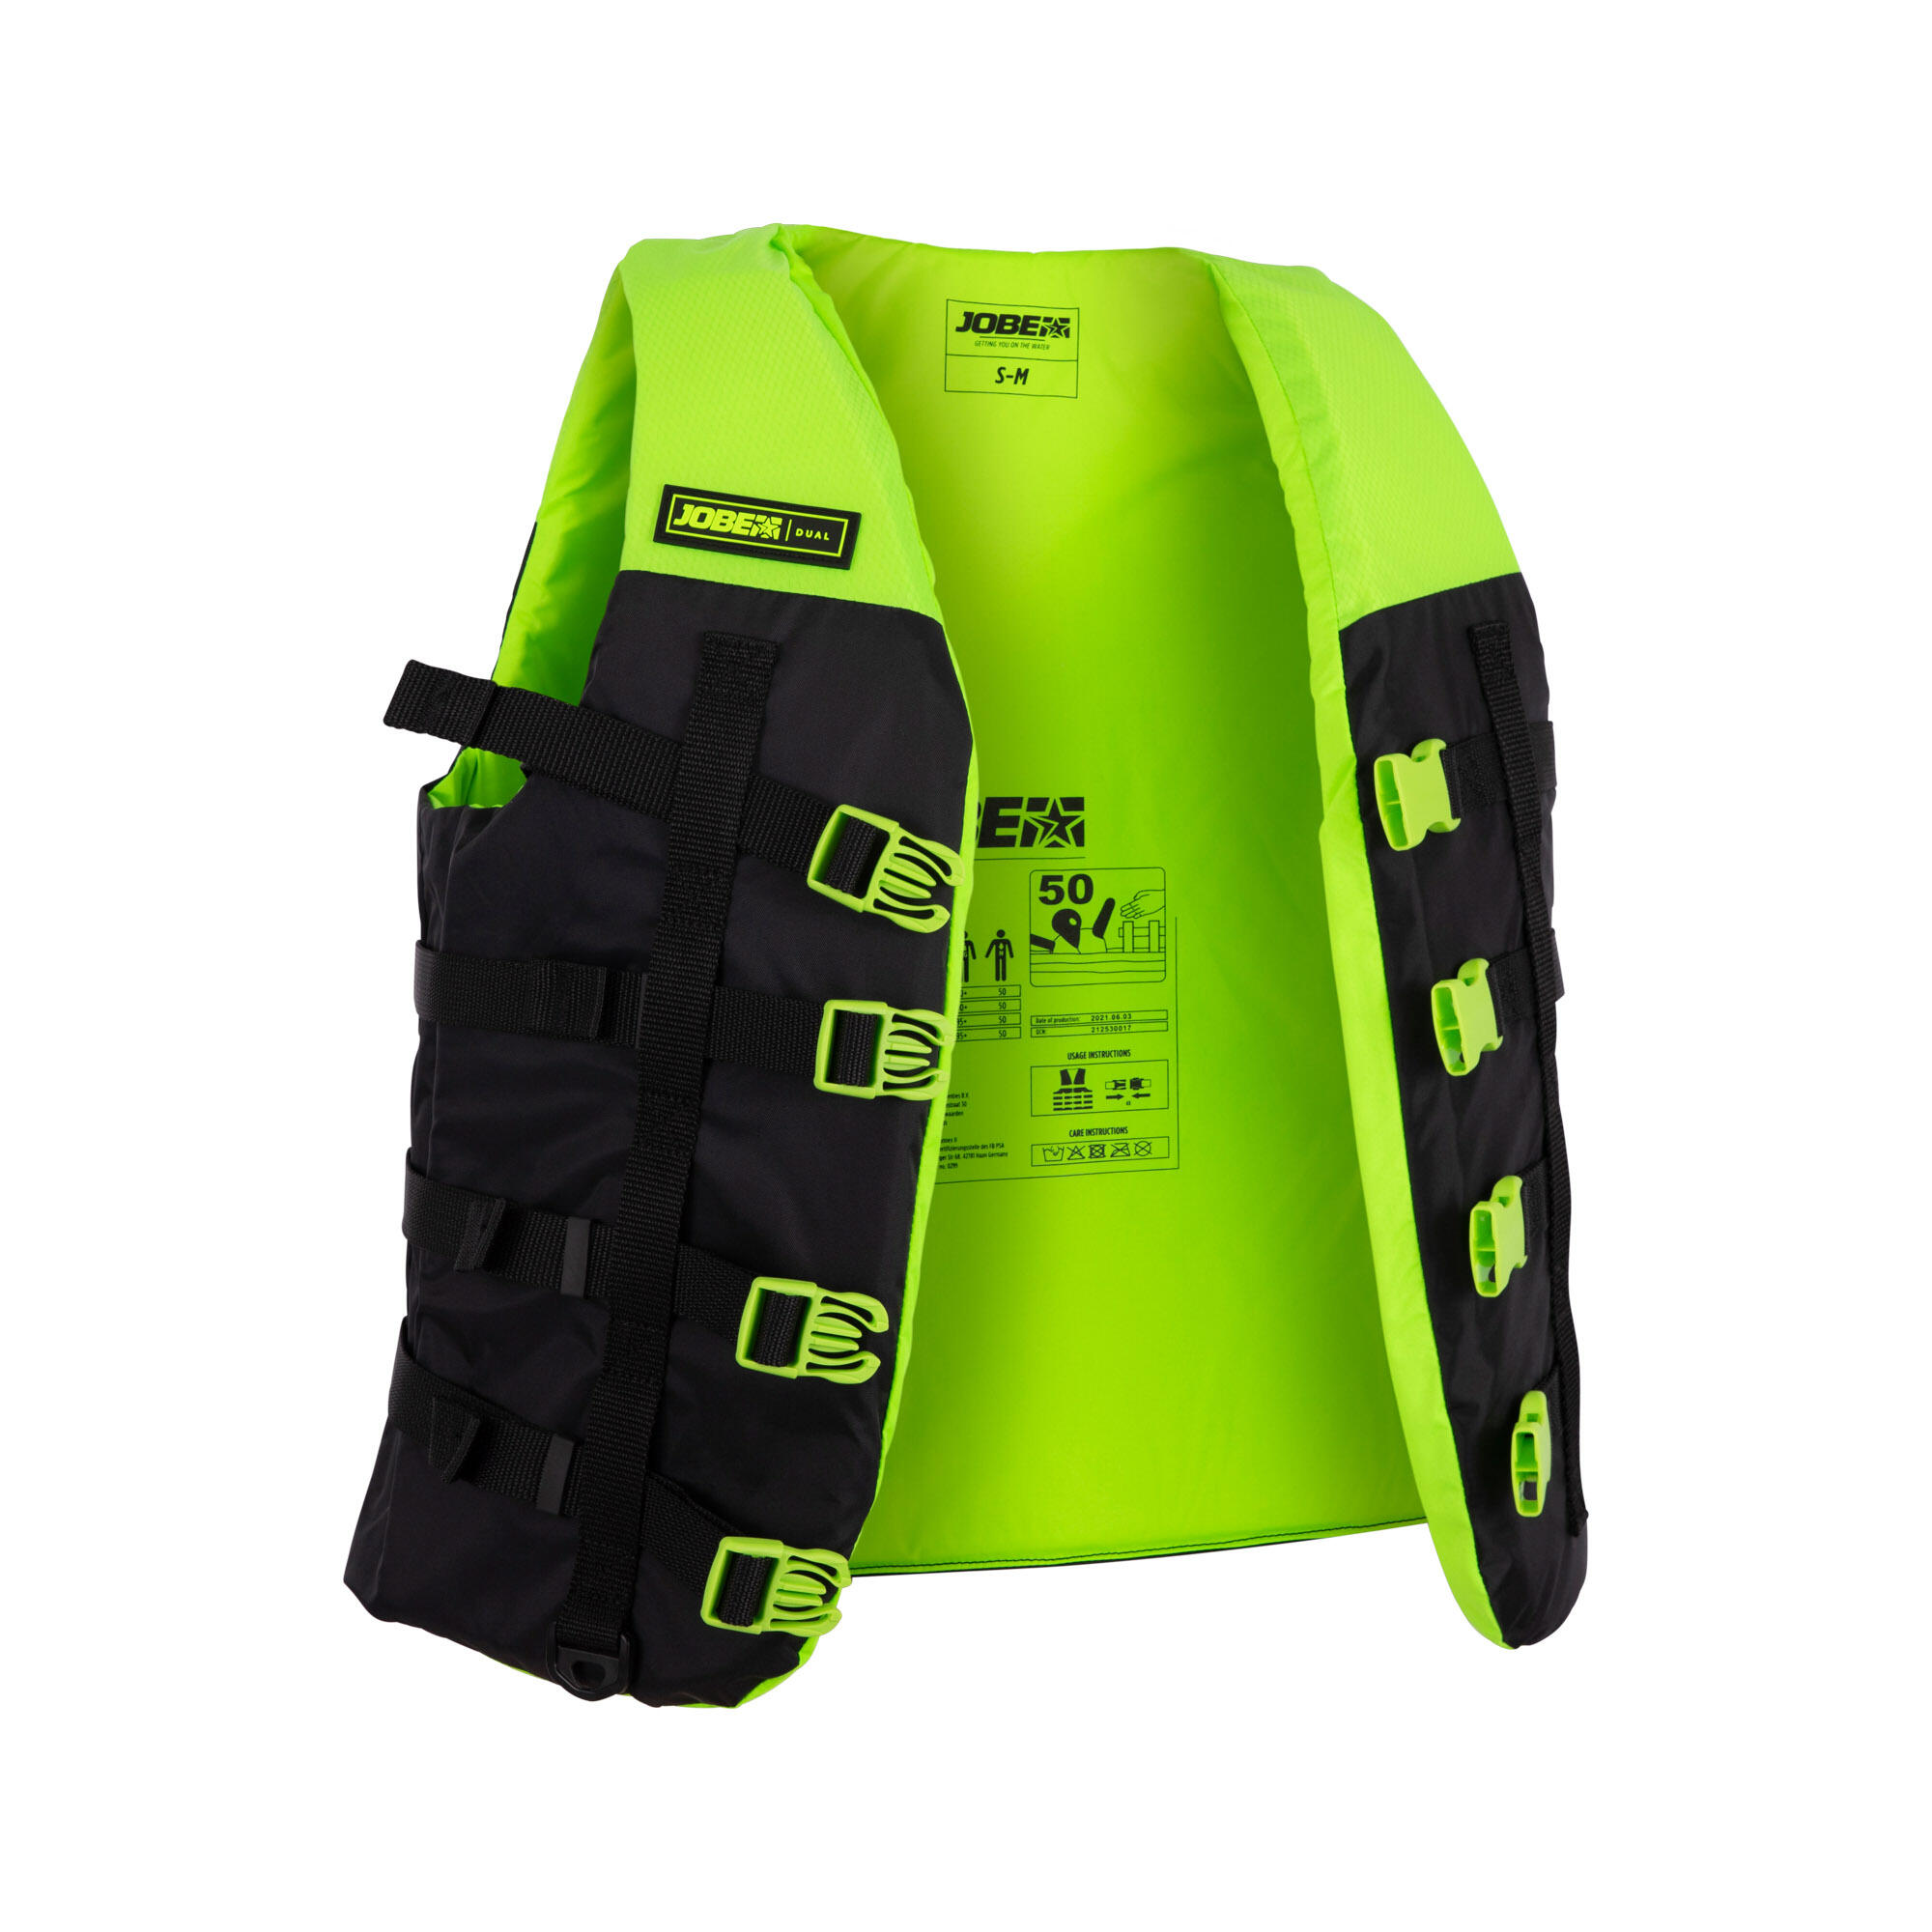 Dual Life Vest (50N) - Lime Green 4/5